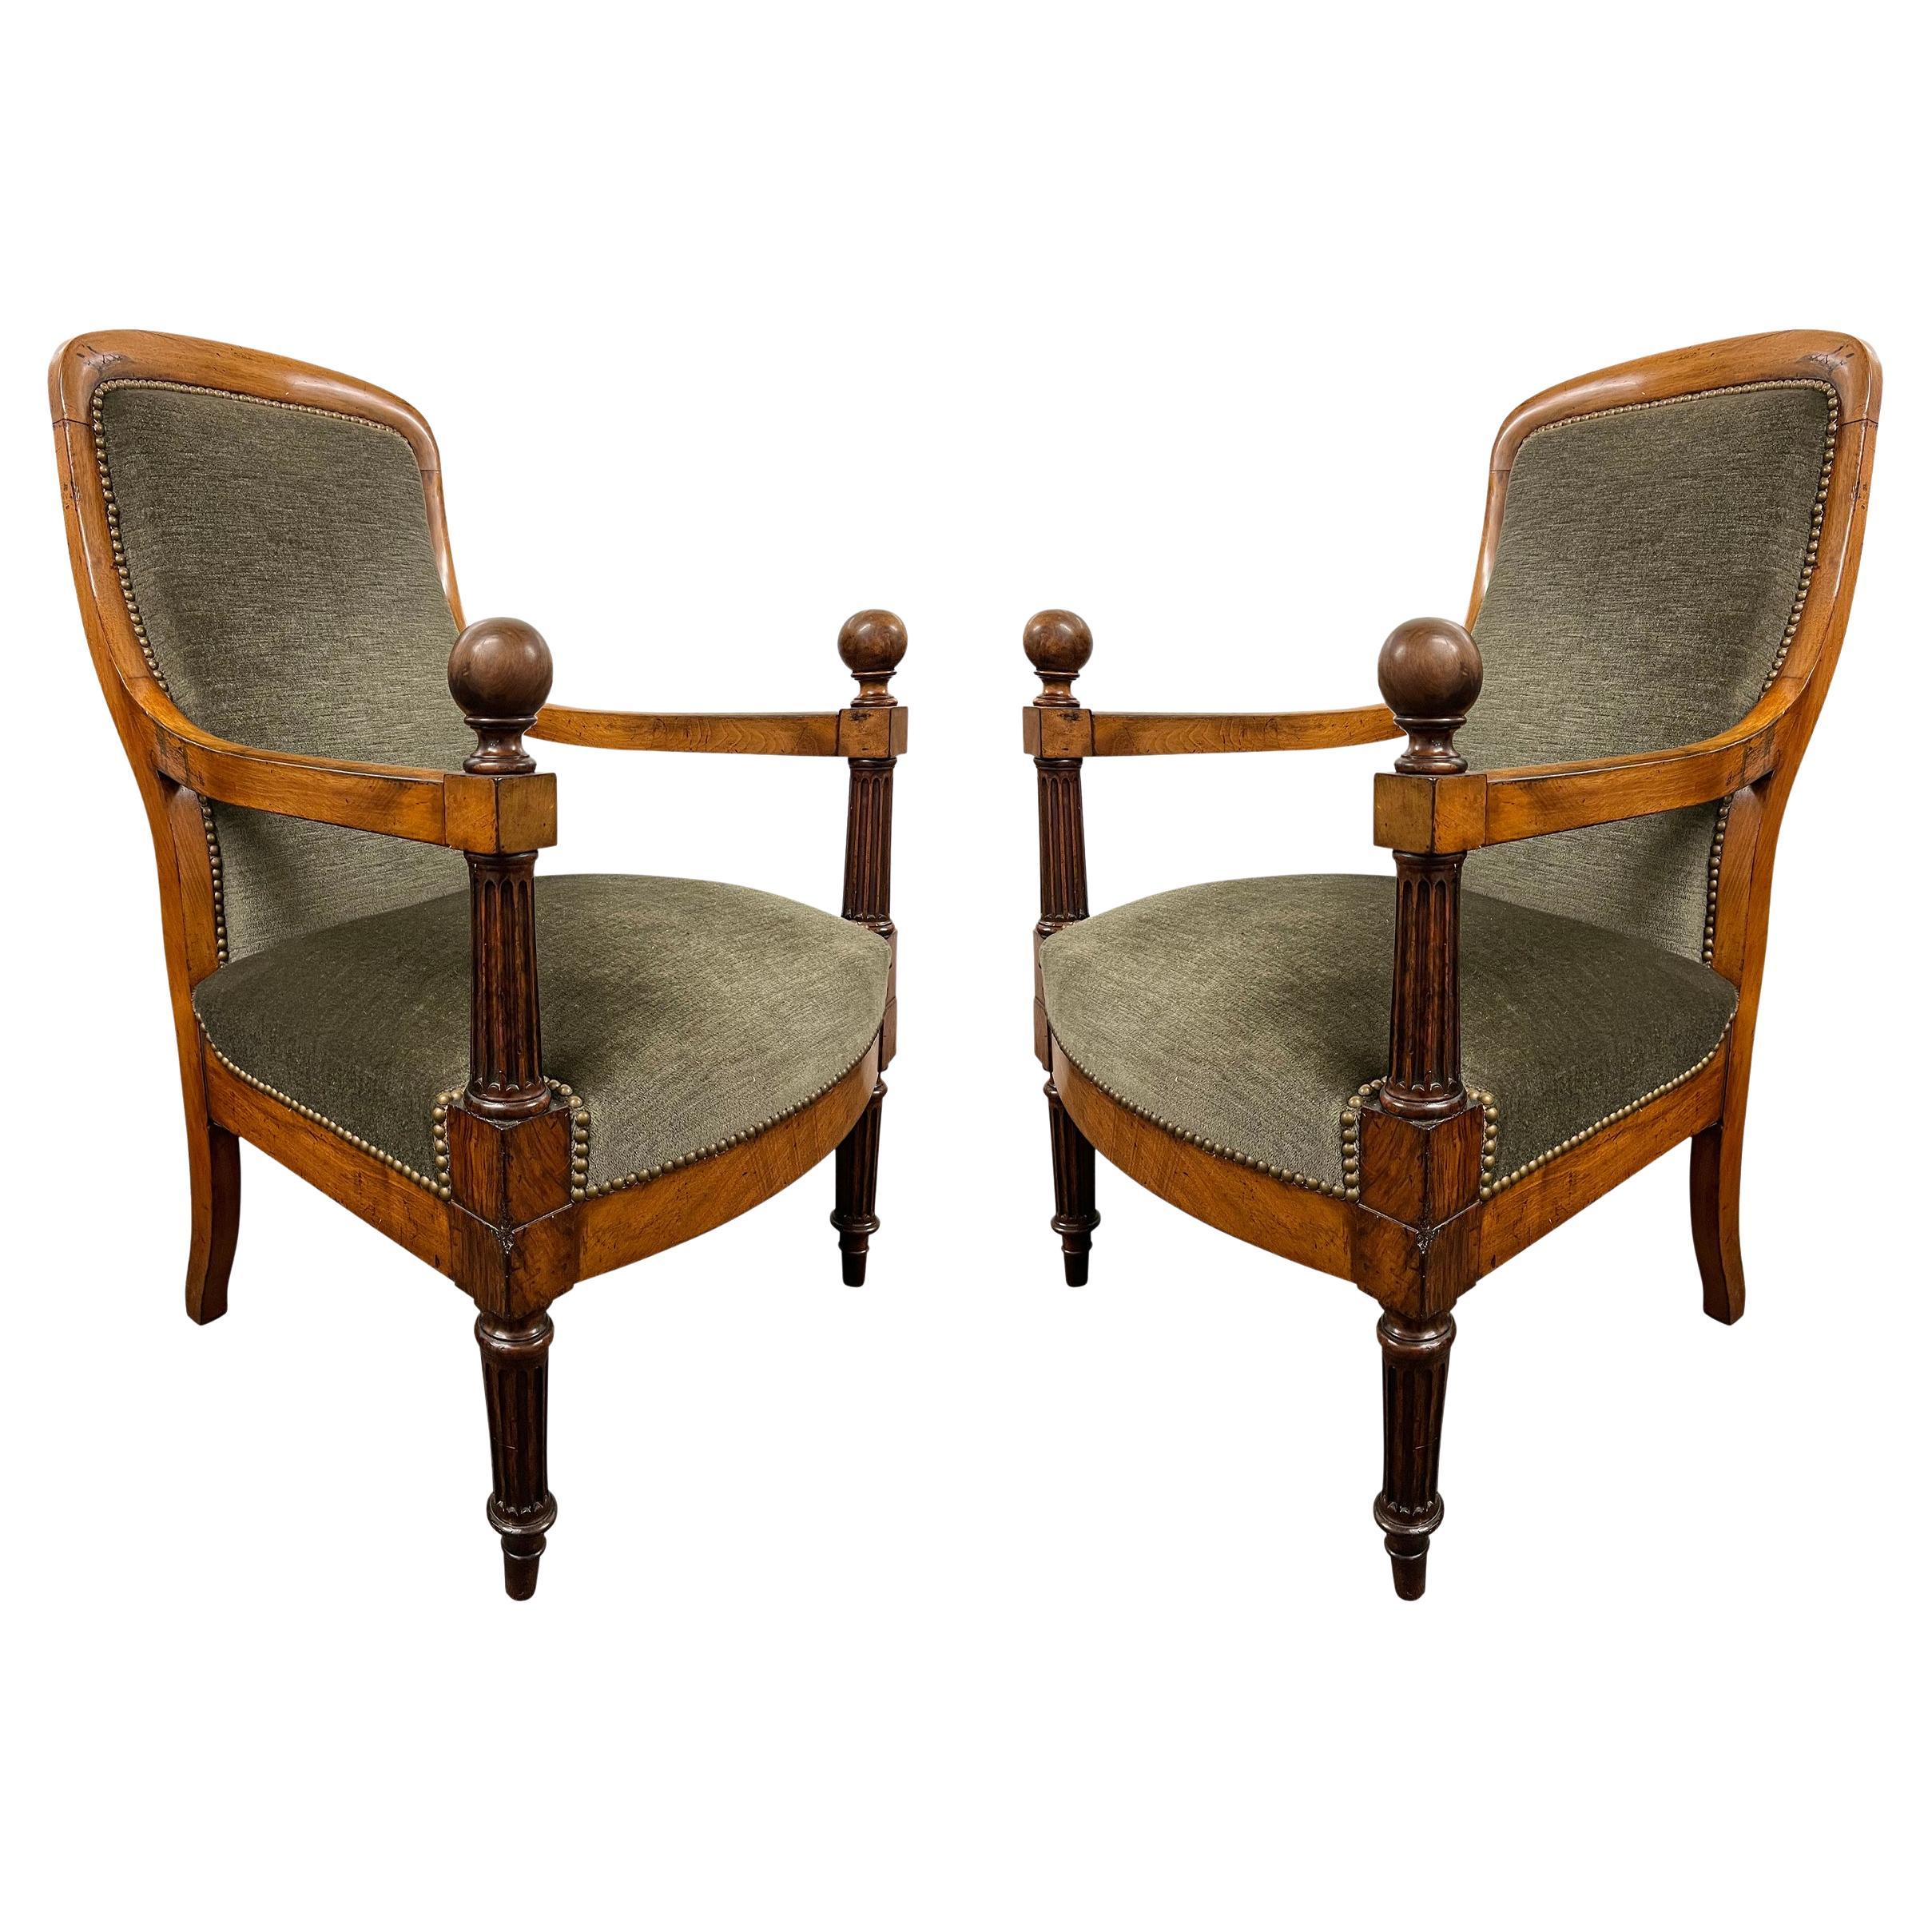 Pair of Early 19th Century English Regency Armchairs